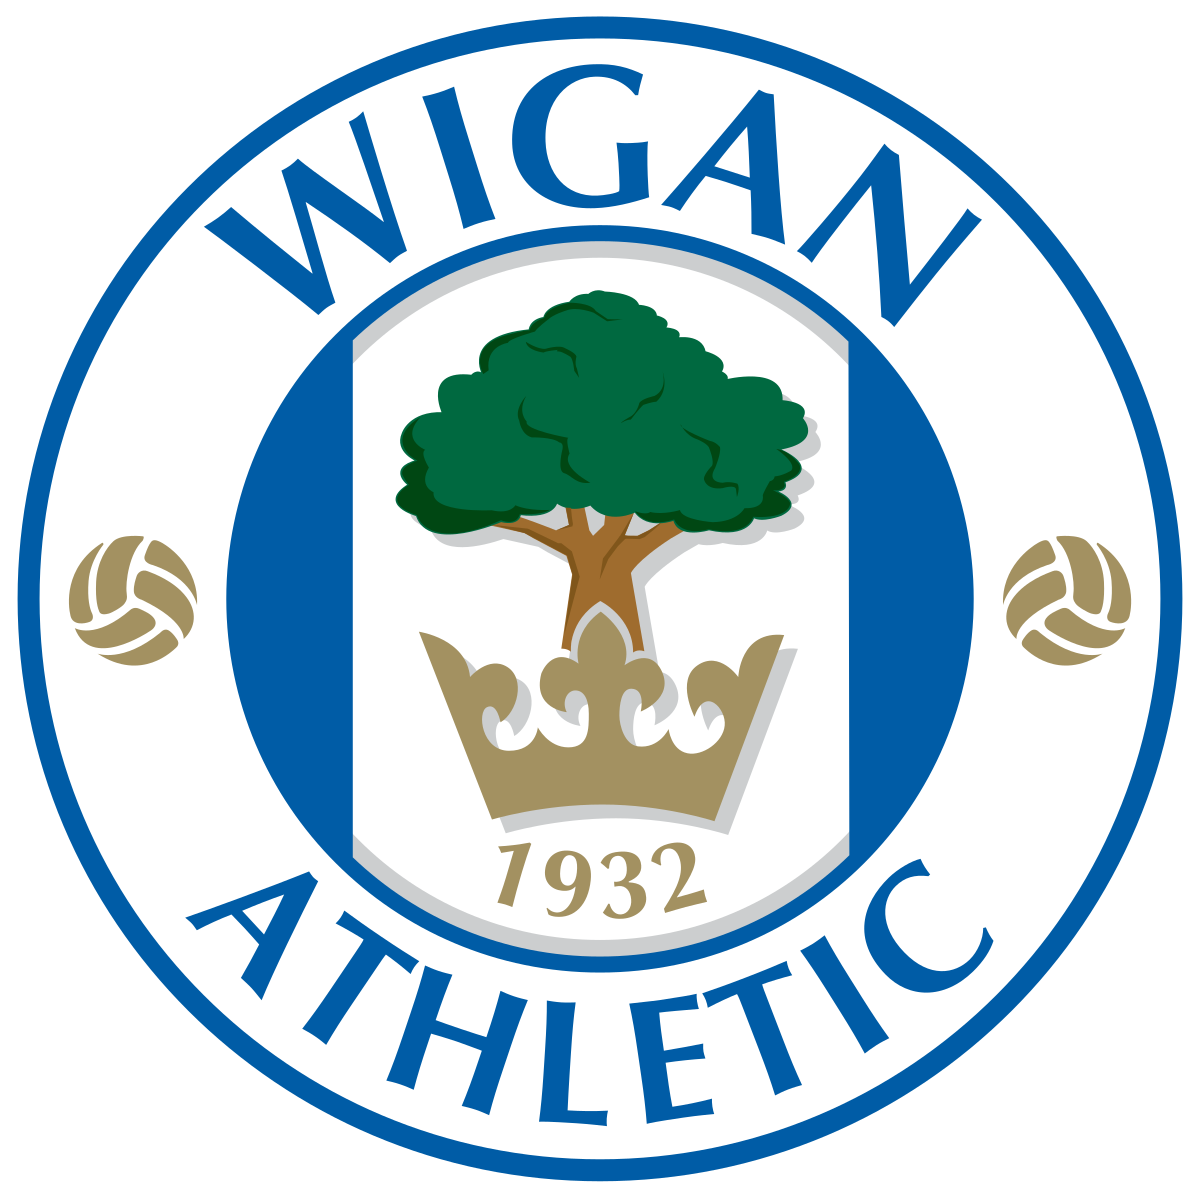 <strong>Wigan</strong>